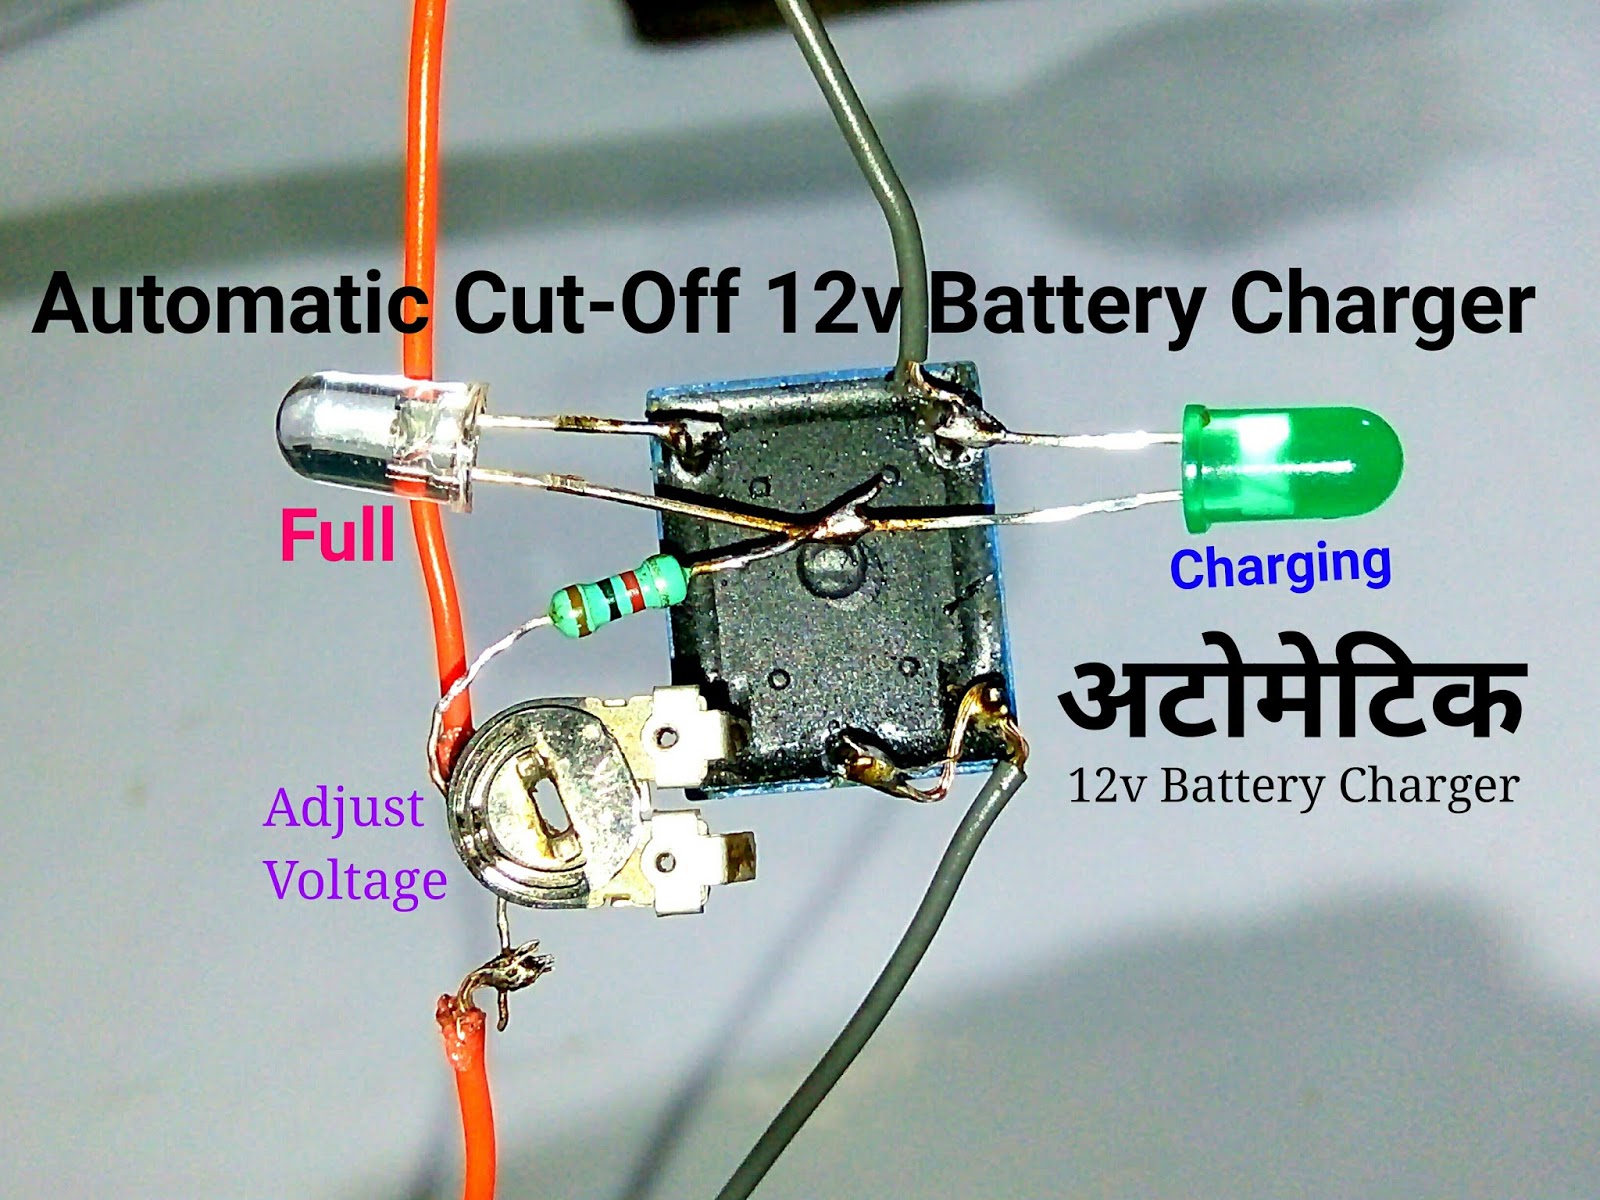 How To Make 12 Volt Automatic Cut Off Battery Charger ...